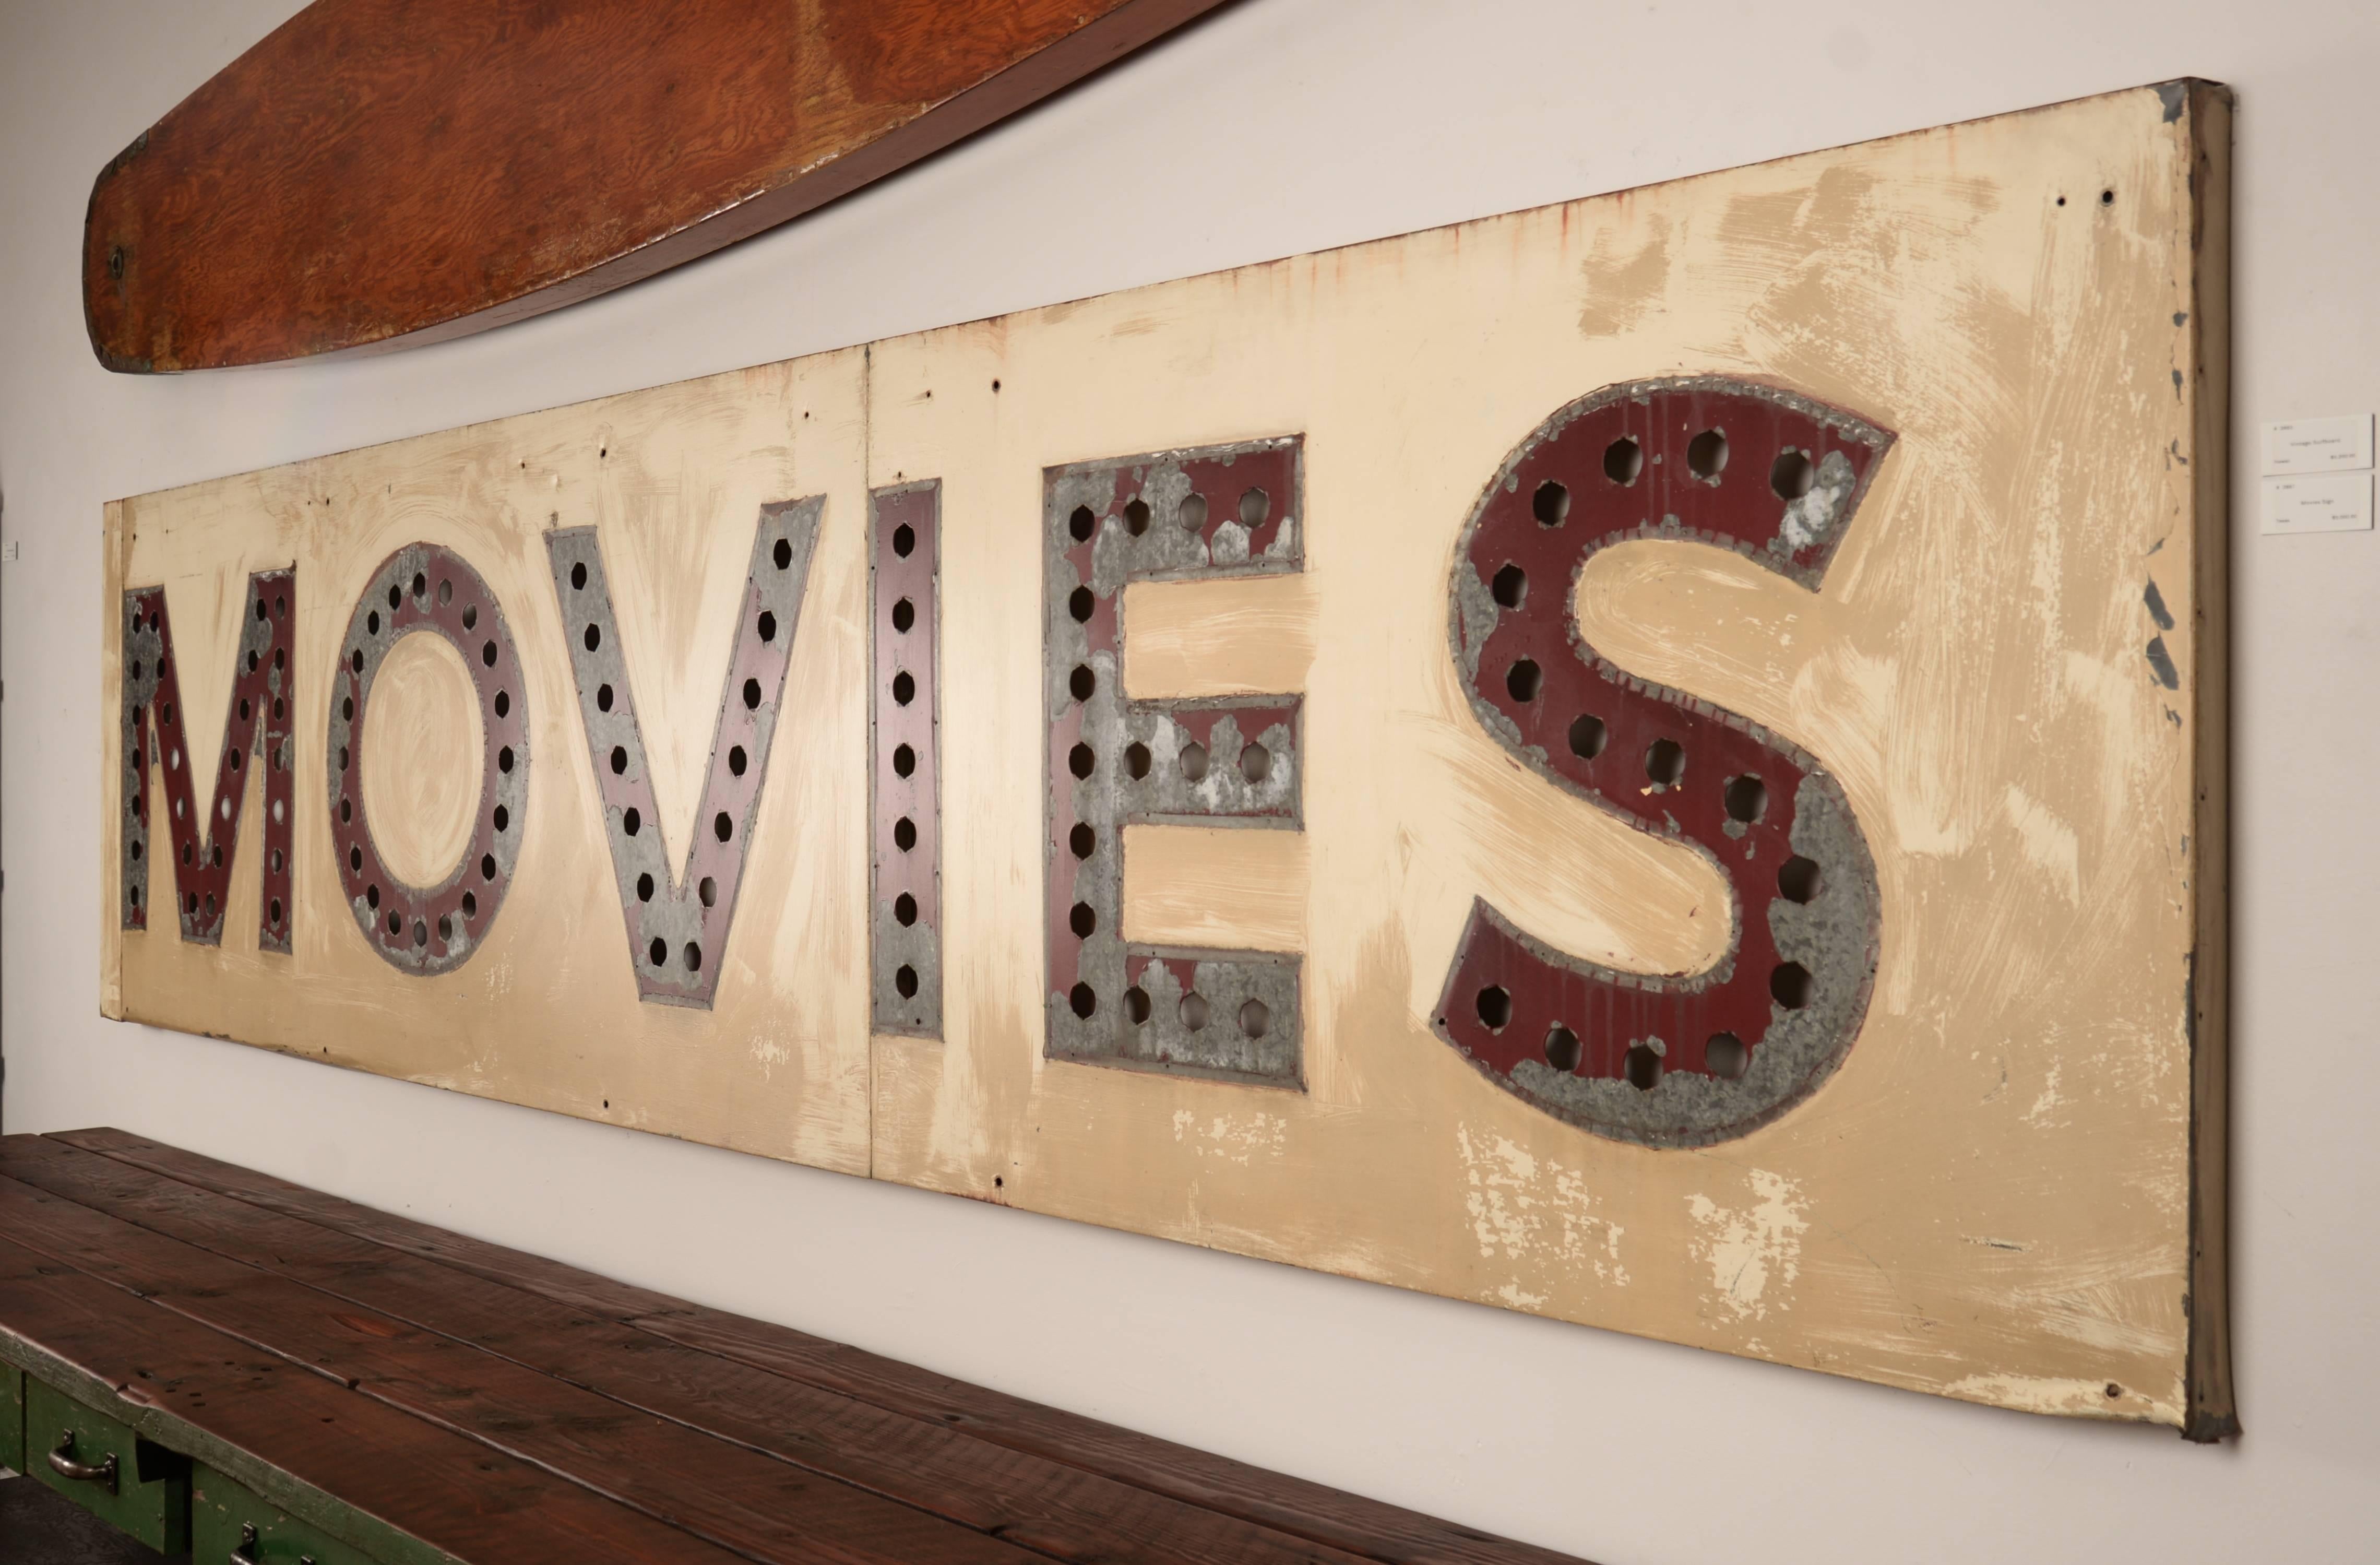 Massive painted steel movie theatre sign. The holes once held medium socket bulbs that probably flashed and chased. We've created a full length wooden wall-mounted cleat for easy and safe display.